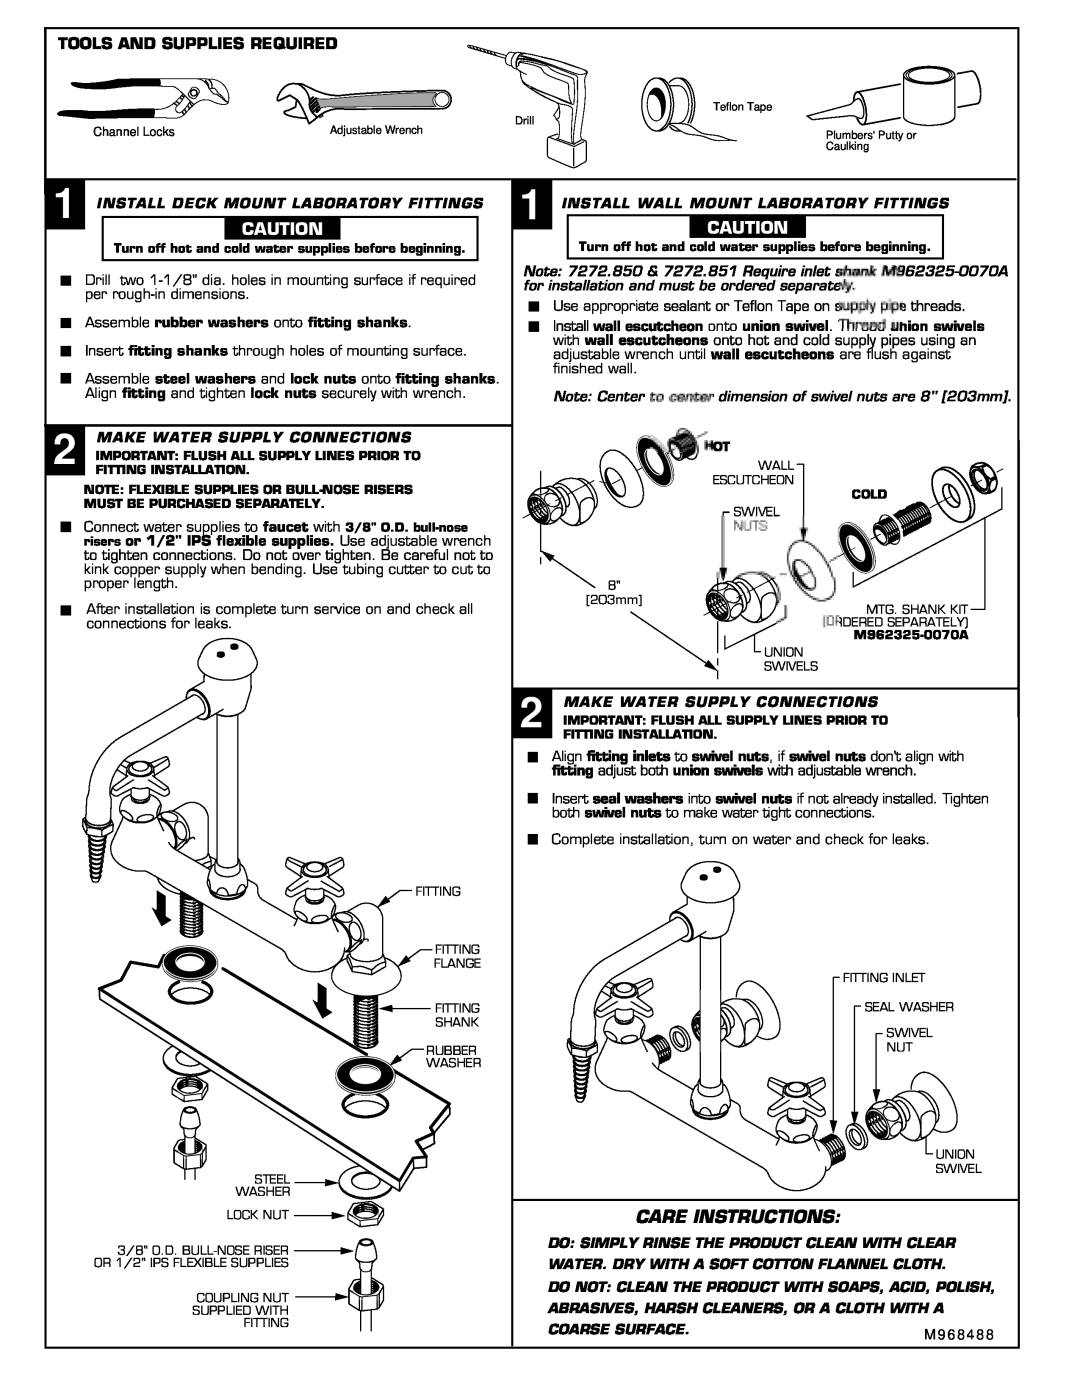 American Standard 7272.851 Care Instructions, Tools And Supplies Required, Install Deck Mount Laboratory Fittings 